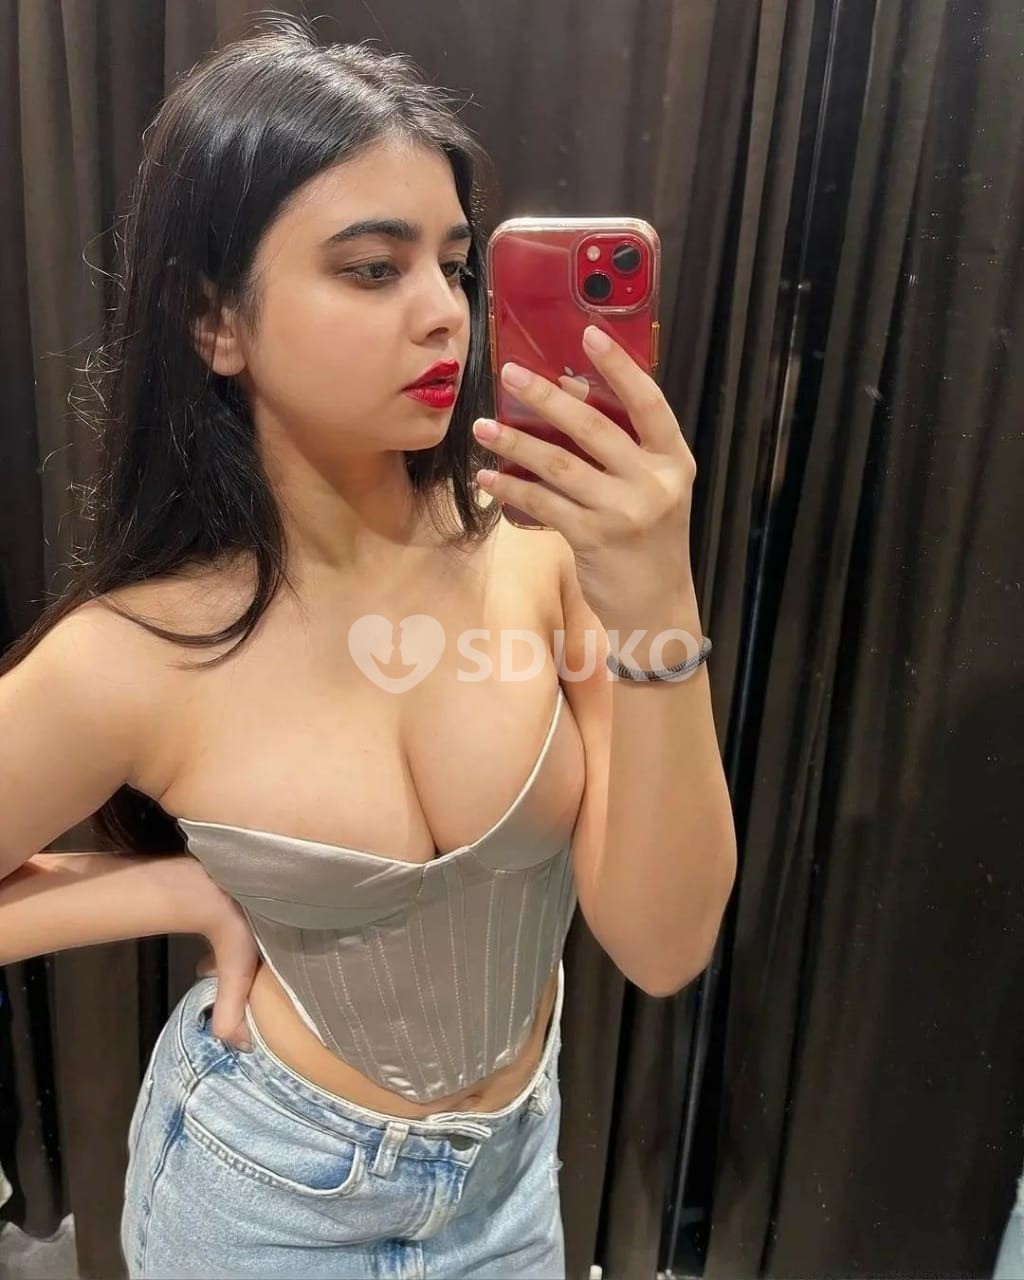 VASHI VIP TODAY LOW PRICE🔅⛱️ ESCORT 🥰SERVICE 100% SAFE AND SECURE ANYTIME CALL ME 24 X 7 SERVICE AVAILABLE 100